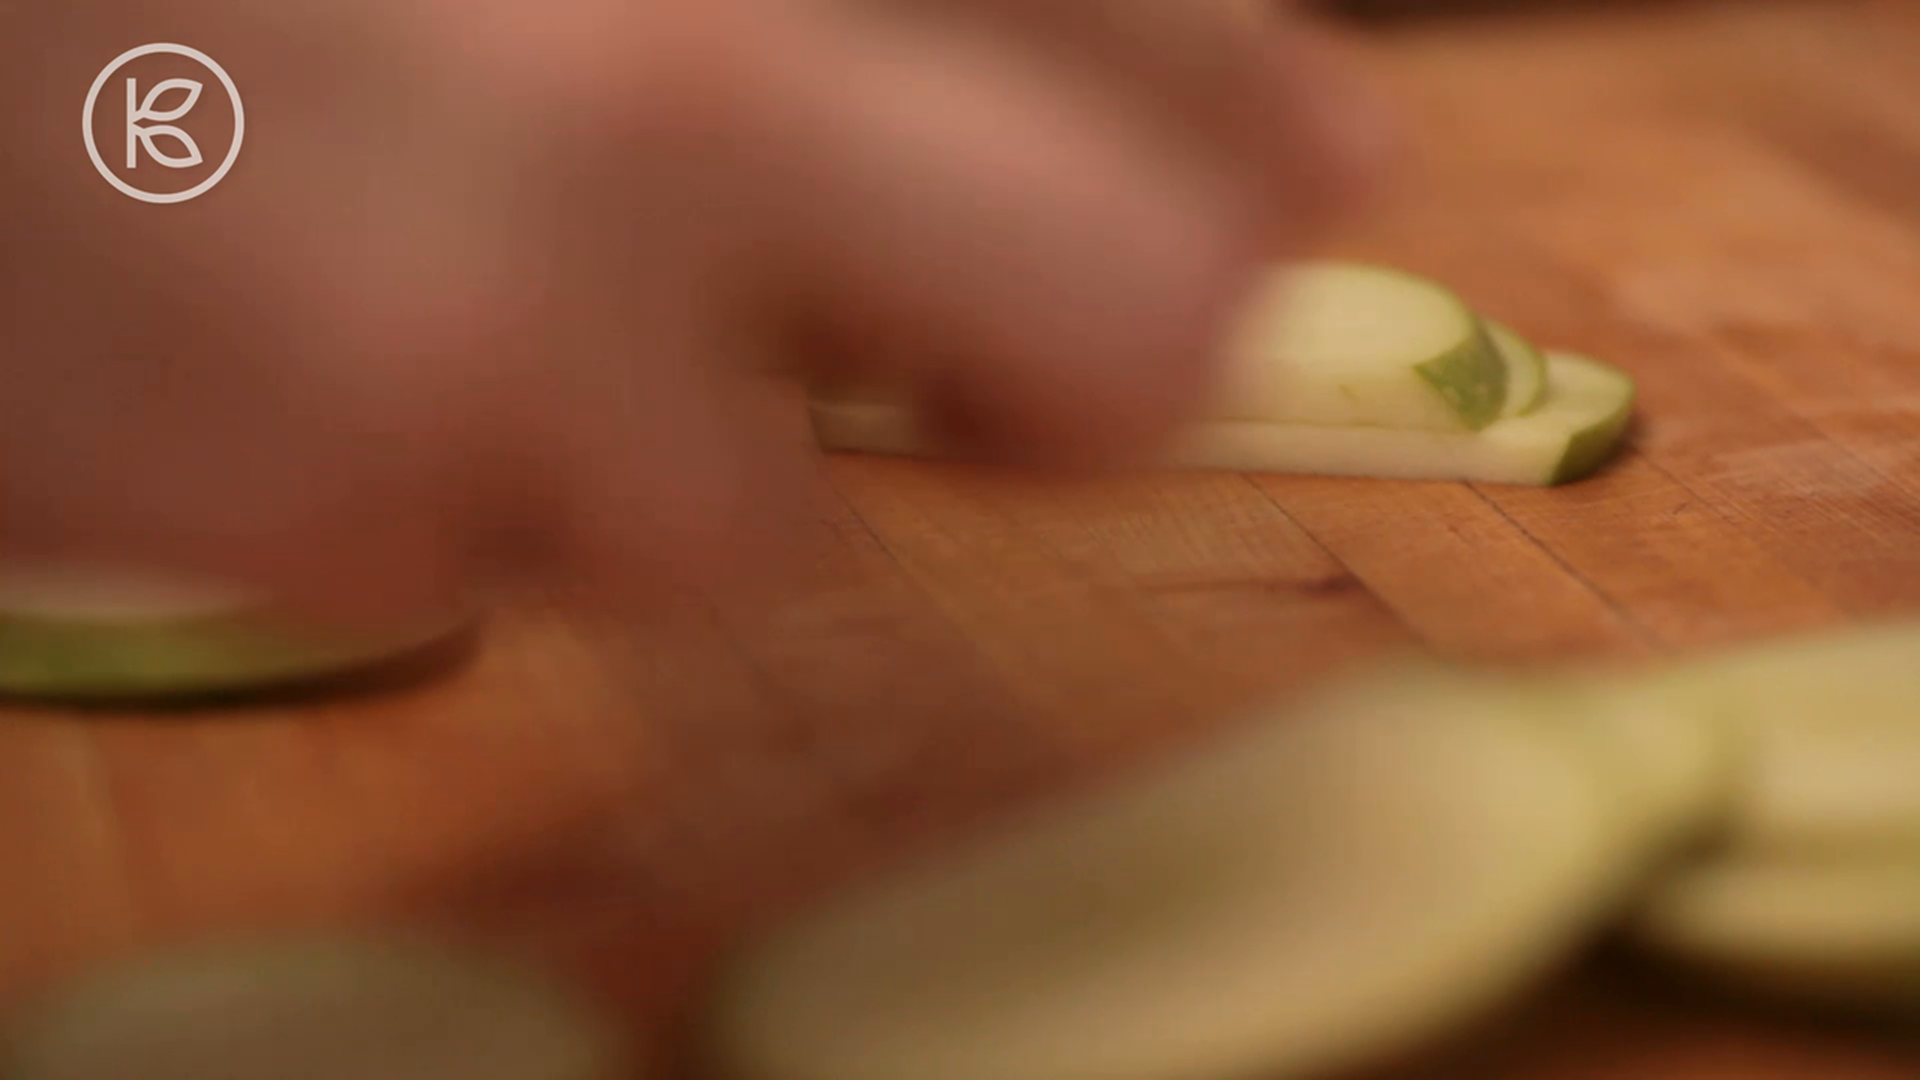 Whether you're slicing or dicing... Louise Leonard is back to show you two easy ways to cut an apple properly.